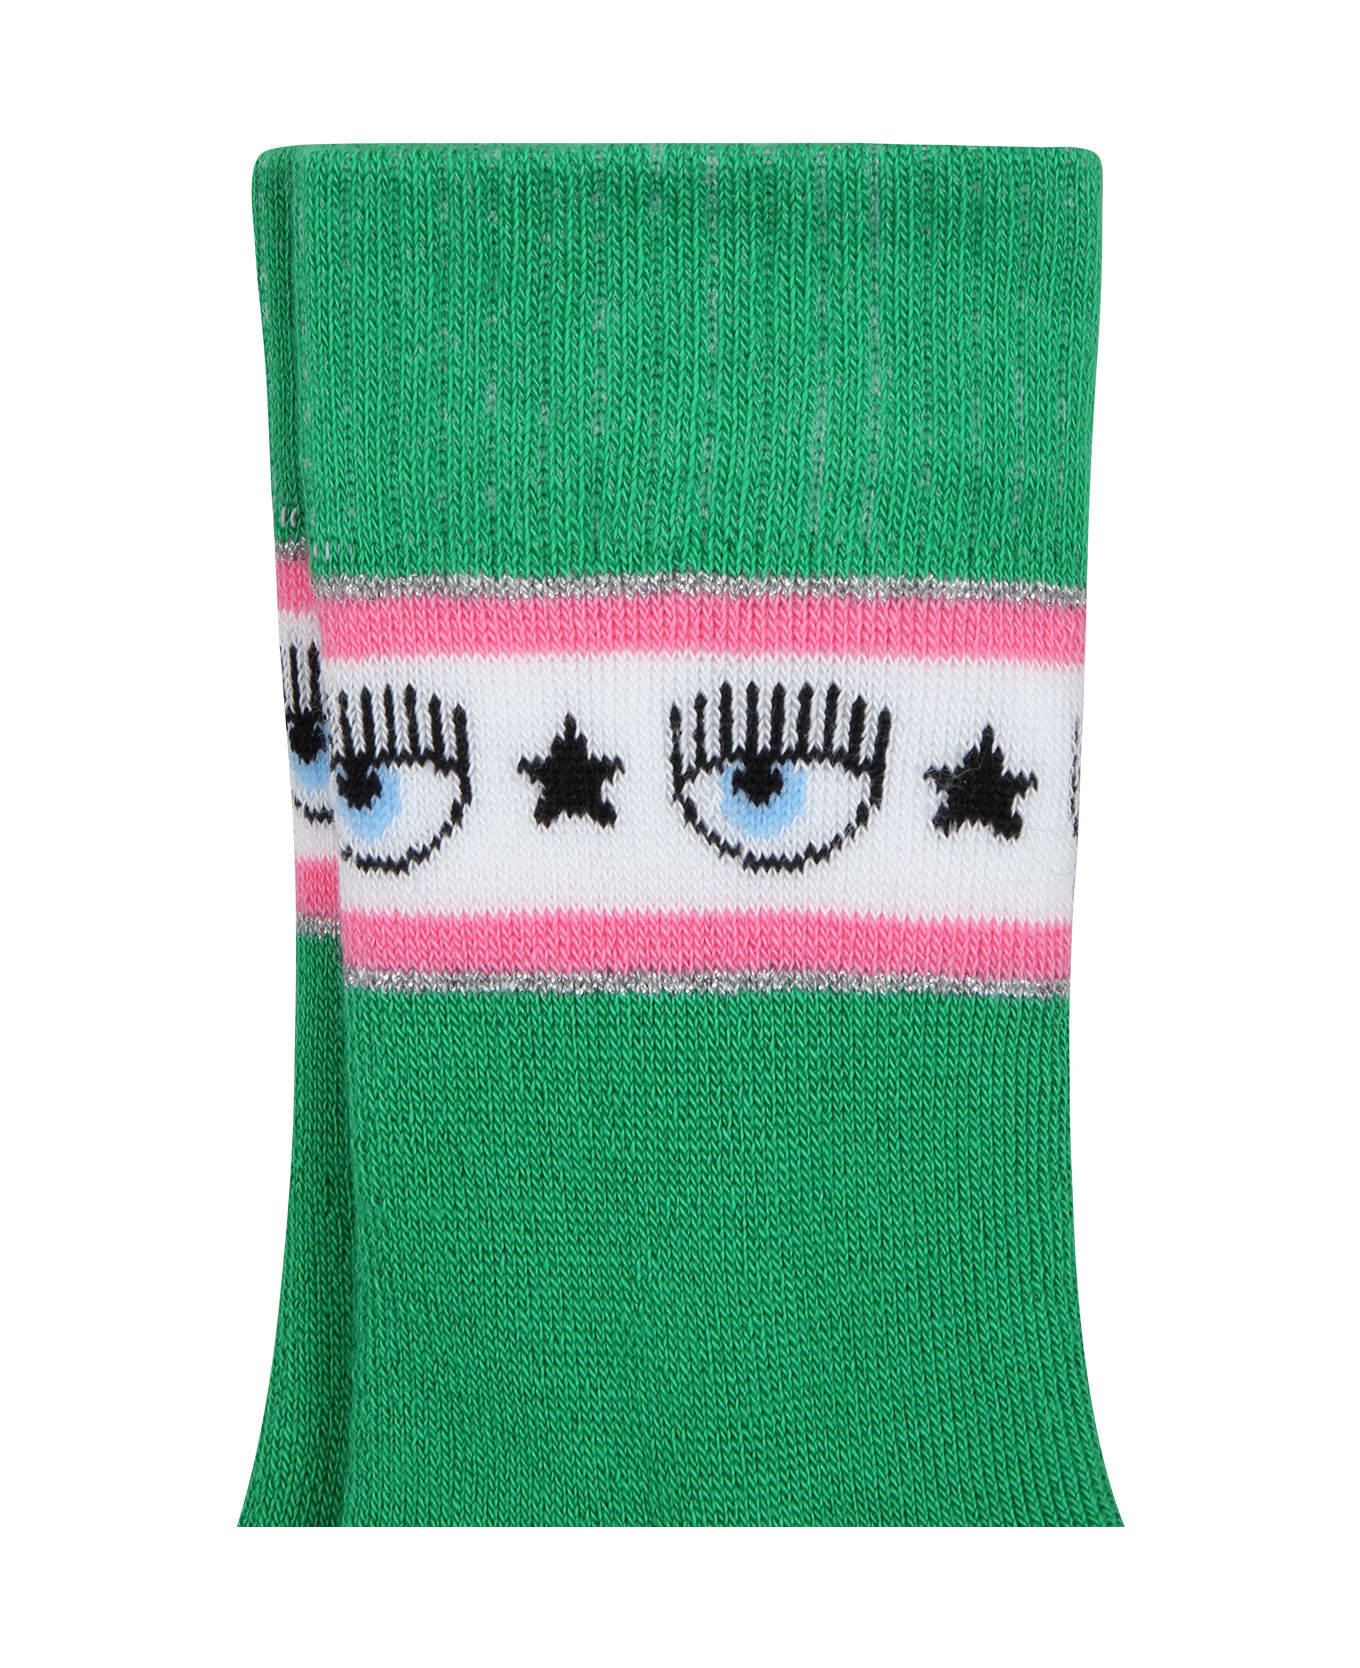 Chiara Ferragni Multicolor Set For Girl With Iconic Eyes - Bright Green